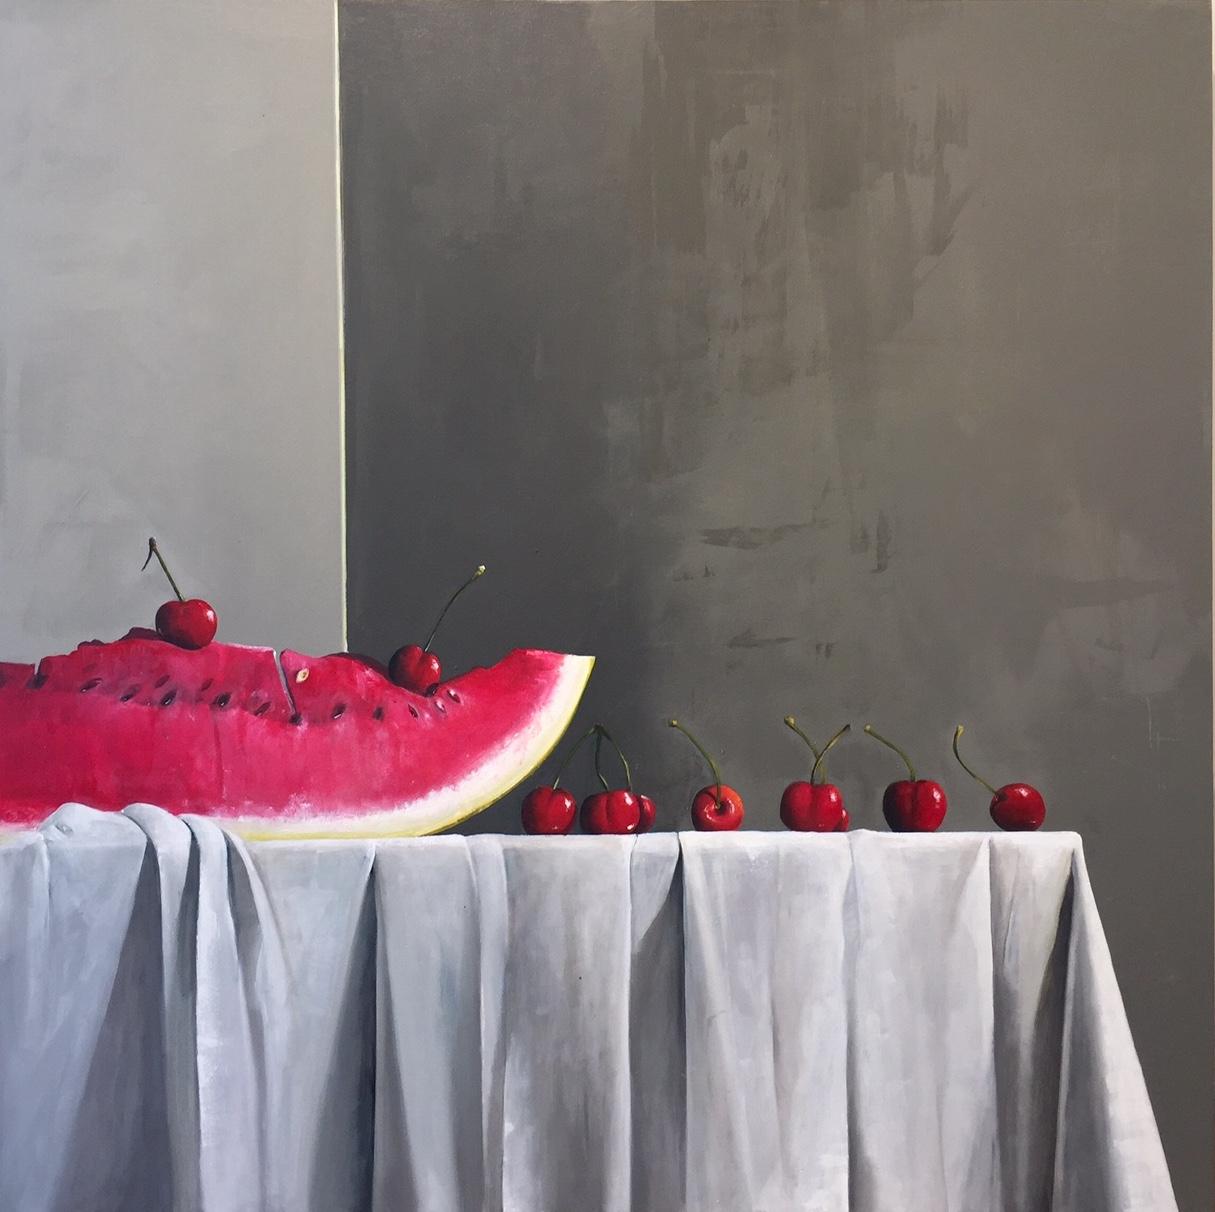 When Life is Still / watermelon and cherries - Magic Realism - American Realist Painting by Stephen Namara